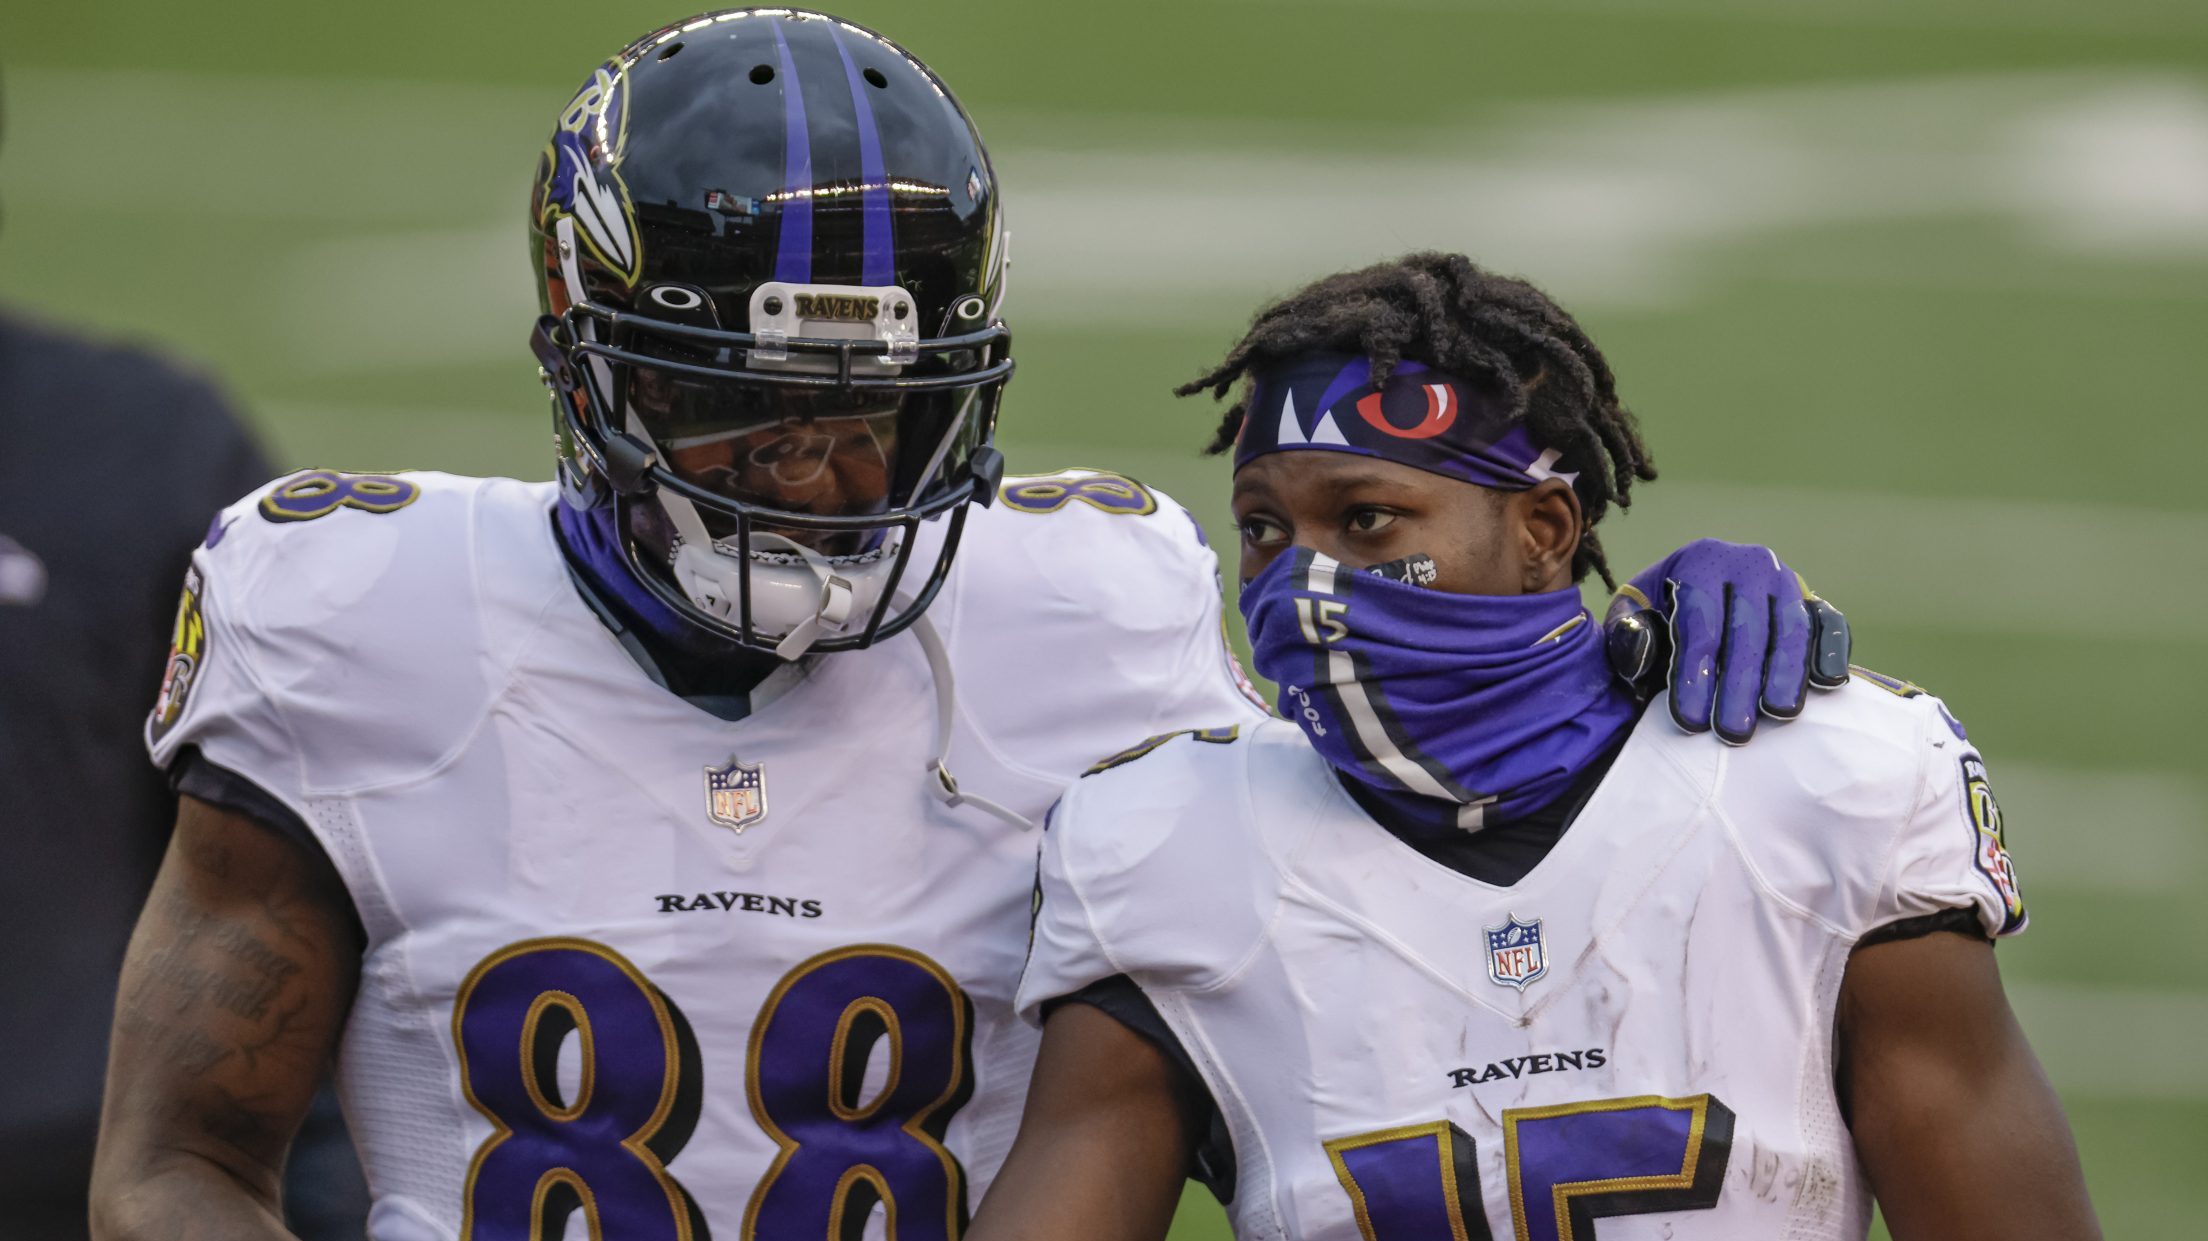 Dez Bryant #88 and Marquise Brown #15 of the Baltimore Ravens are seen after the game against the C...